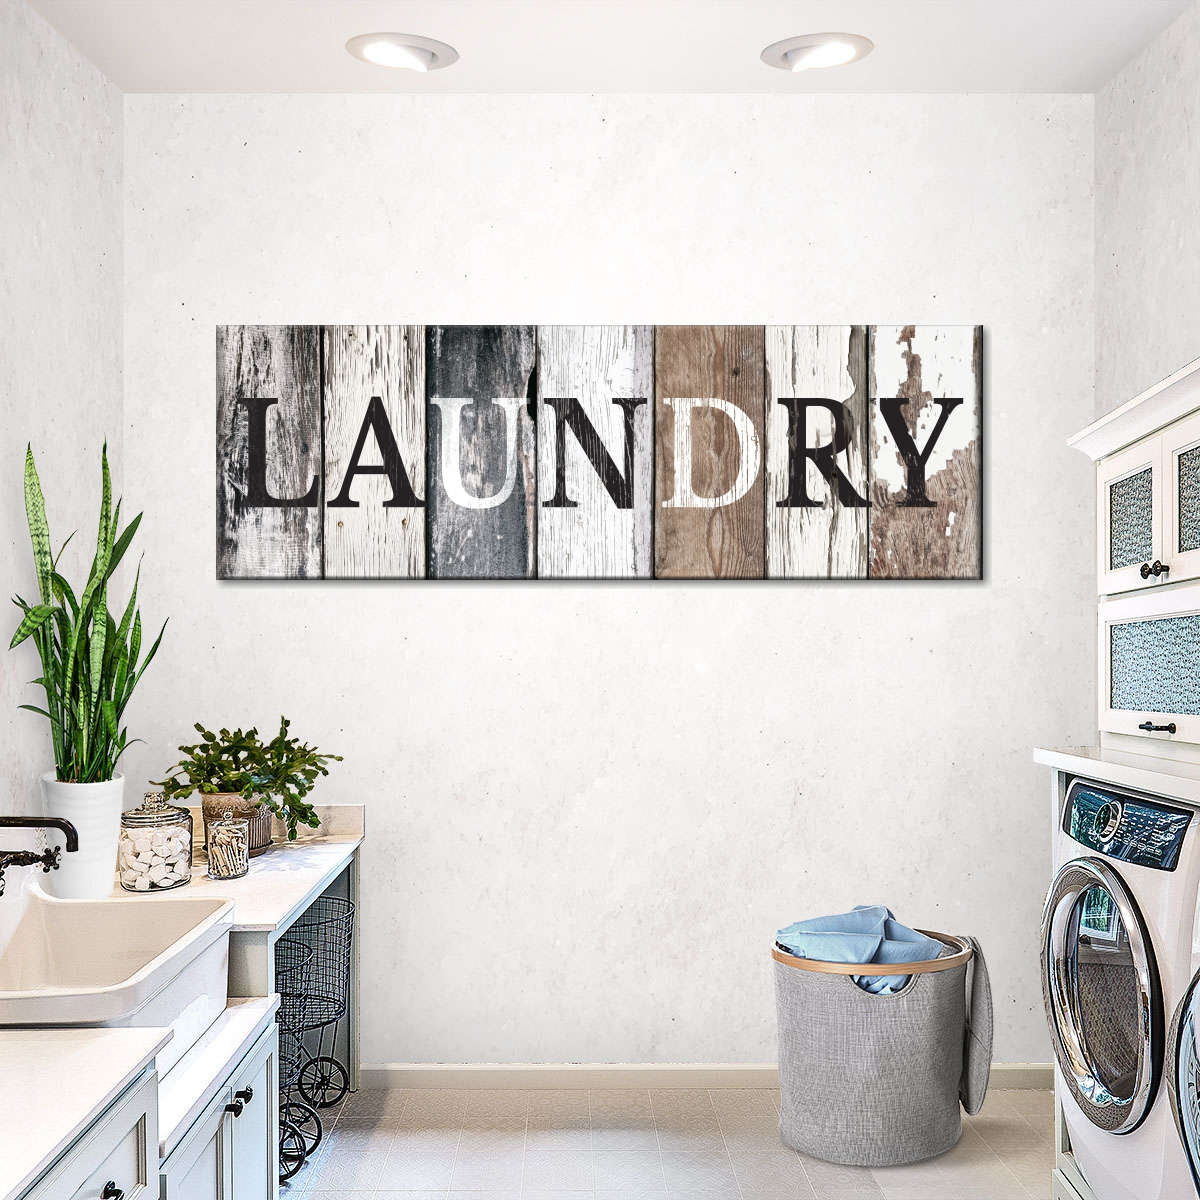 Level Up Your Laundry Room Decorating with Wall Art